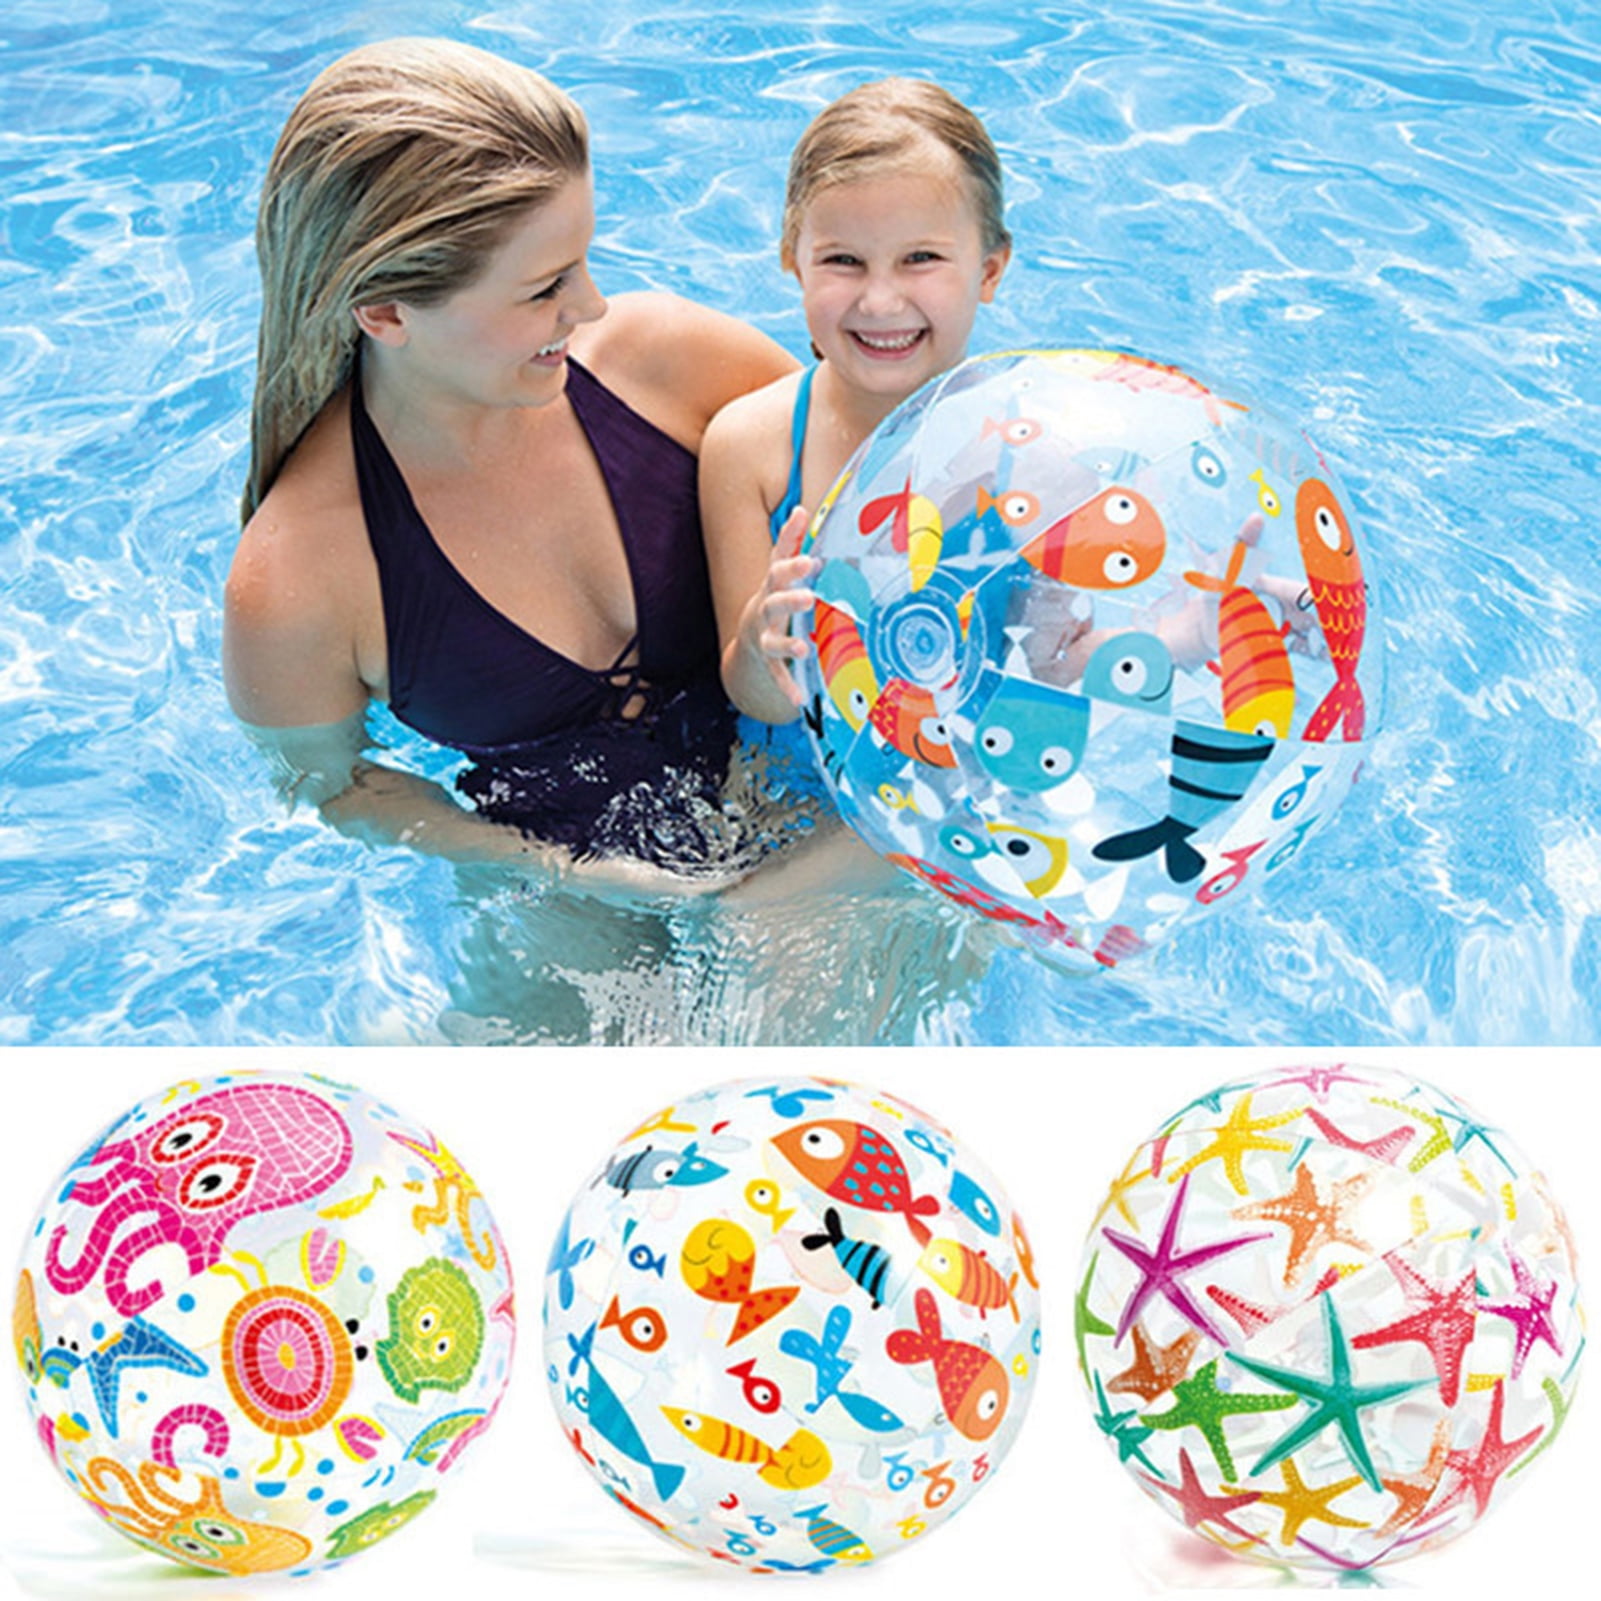 Baby Kids Beach Pool Play Ball Inflatable Educational Children Ball Toys BLUS